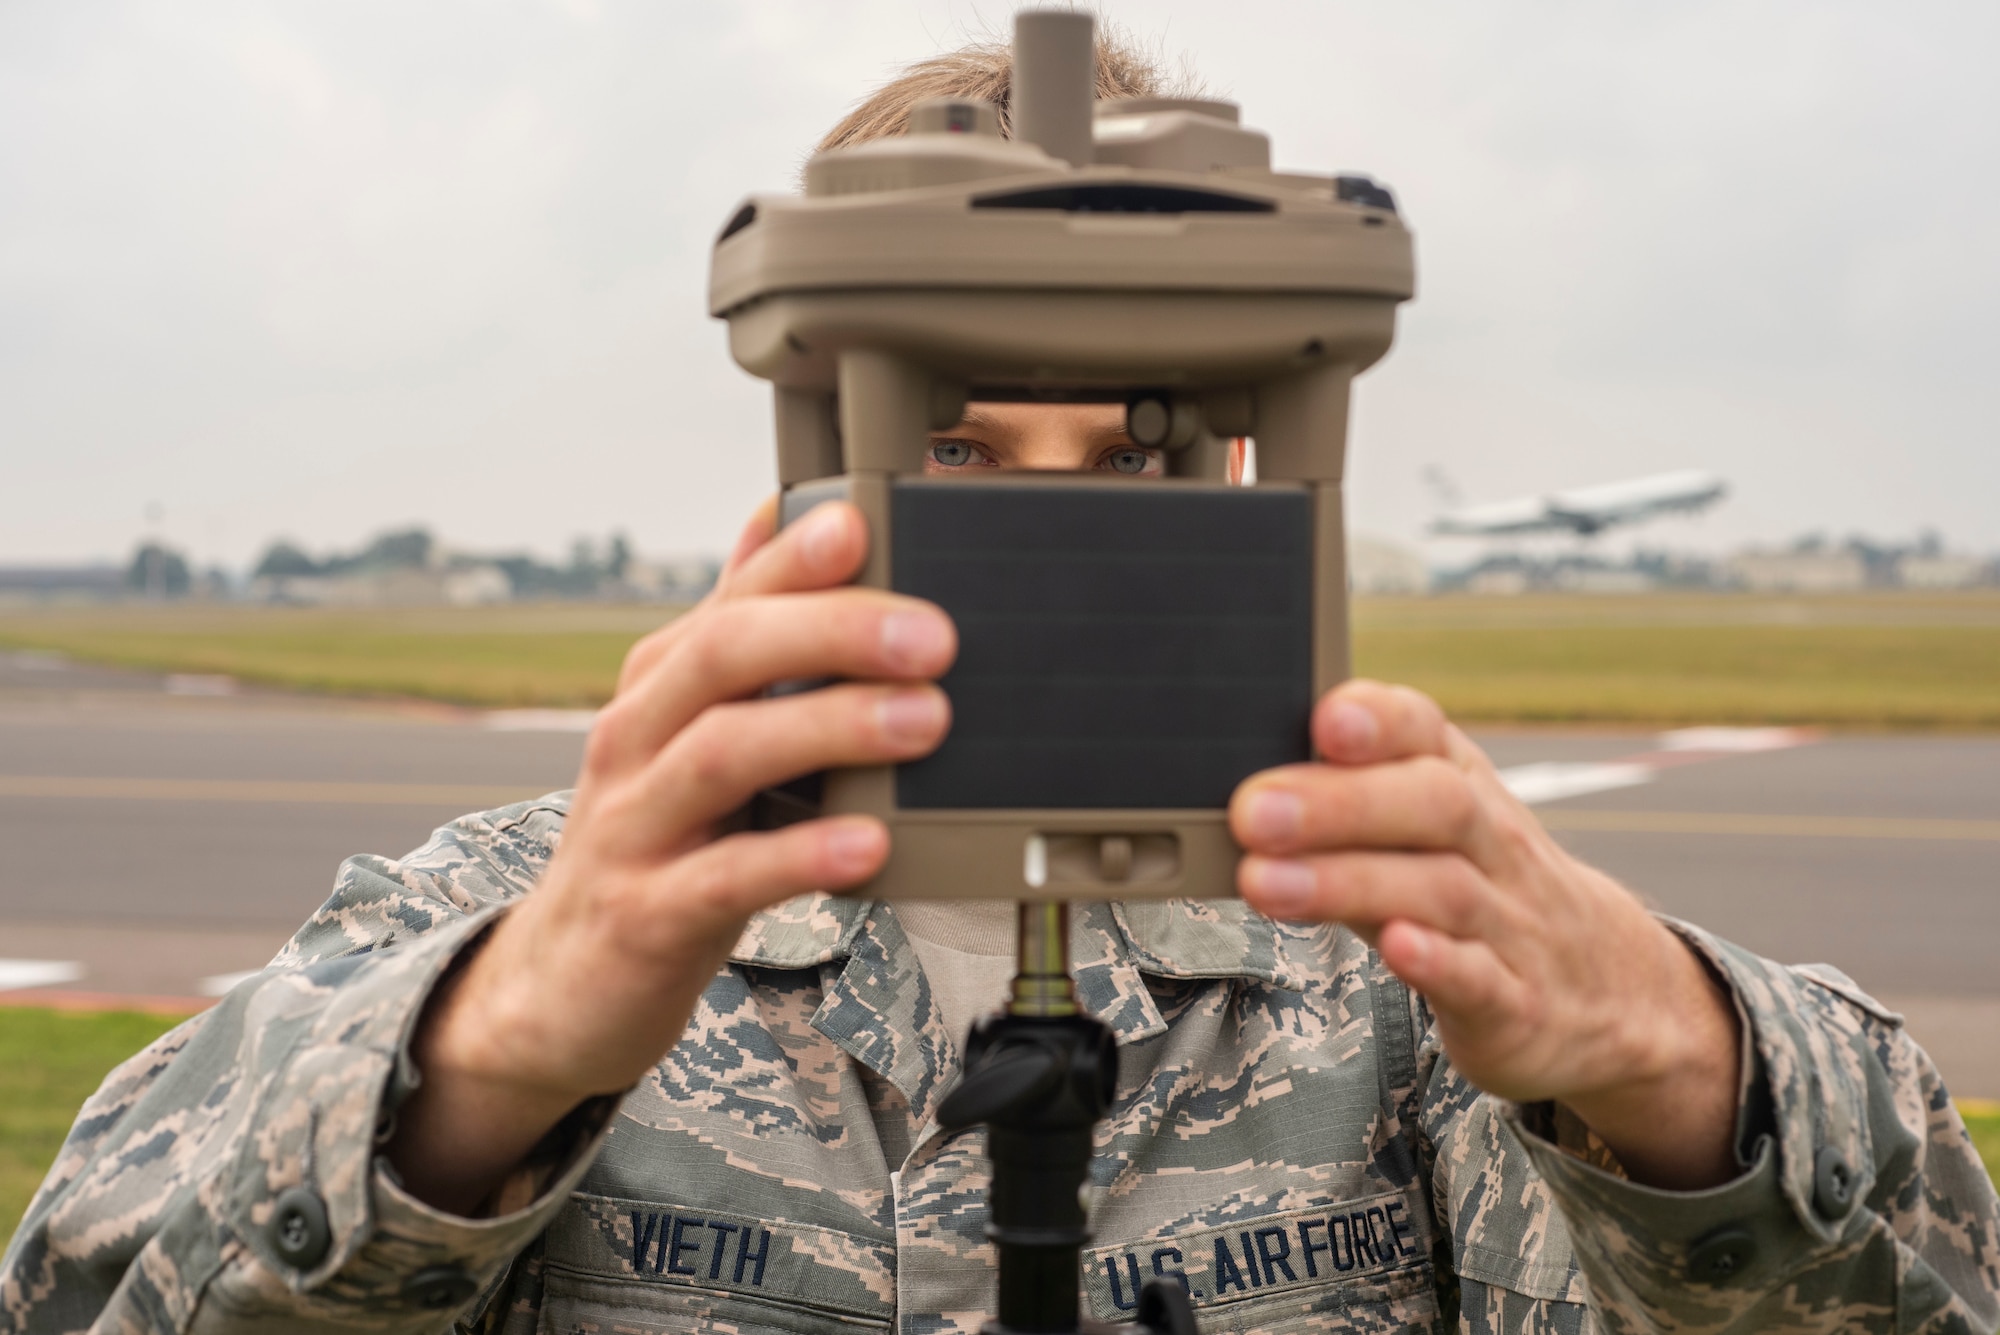 U.S. Air Force Airman 1st Class Adam Vieth, 100th Operations Support Squadron weather forecaster apprentice, secures the micro weather sensor on a tripod Sept. 10, 2019, at RAF Mildenhall, England.  Airmen can access the data the micro weather sensor collects anywhere they have an internet connection and Common Access Card reader.  (U.S. Air Force photo by Airman 1st Class Joseph Barron)